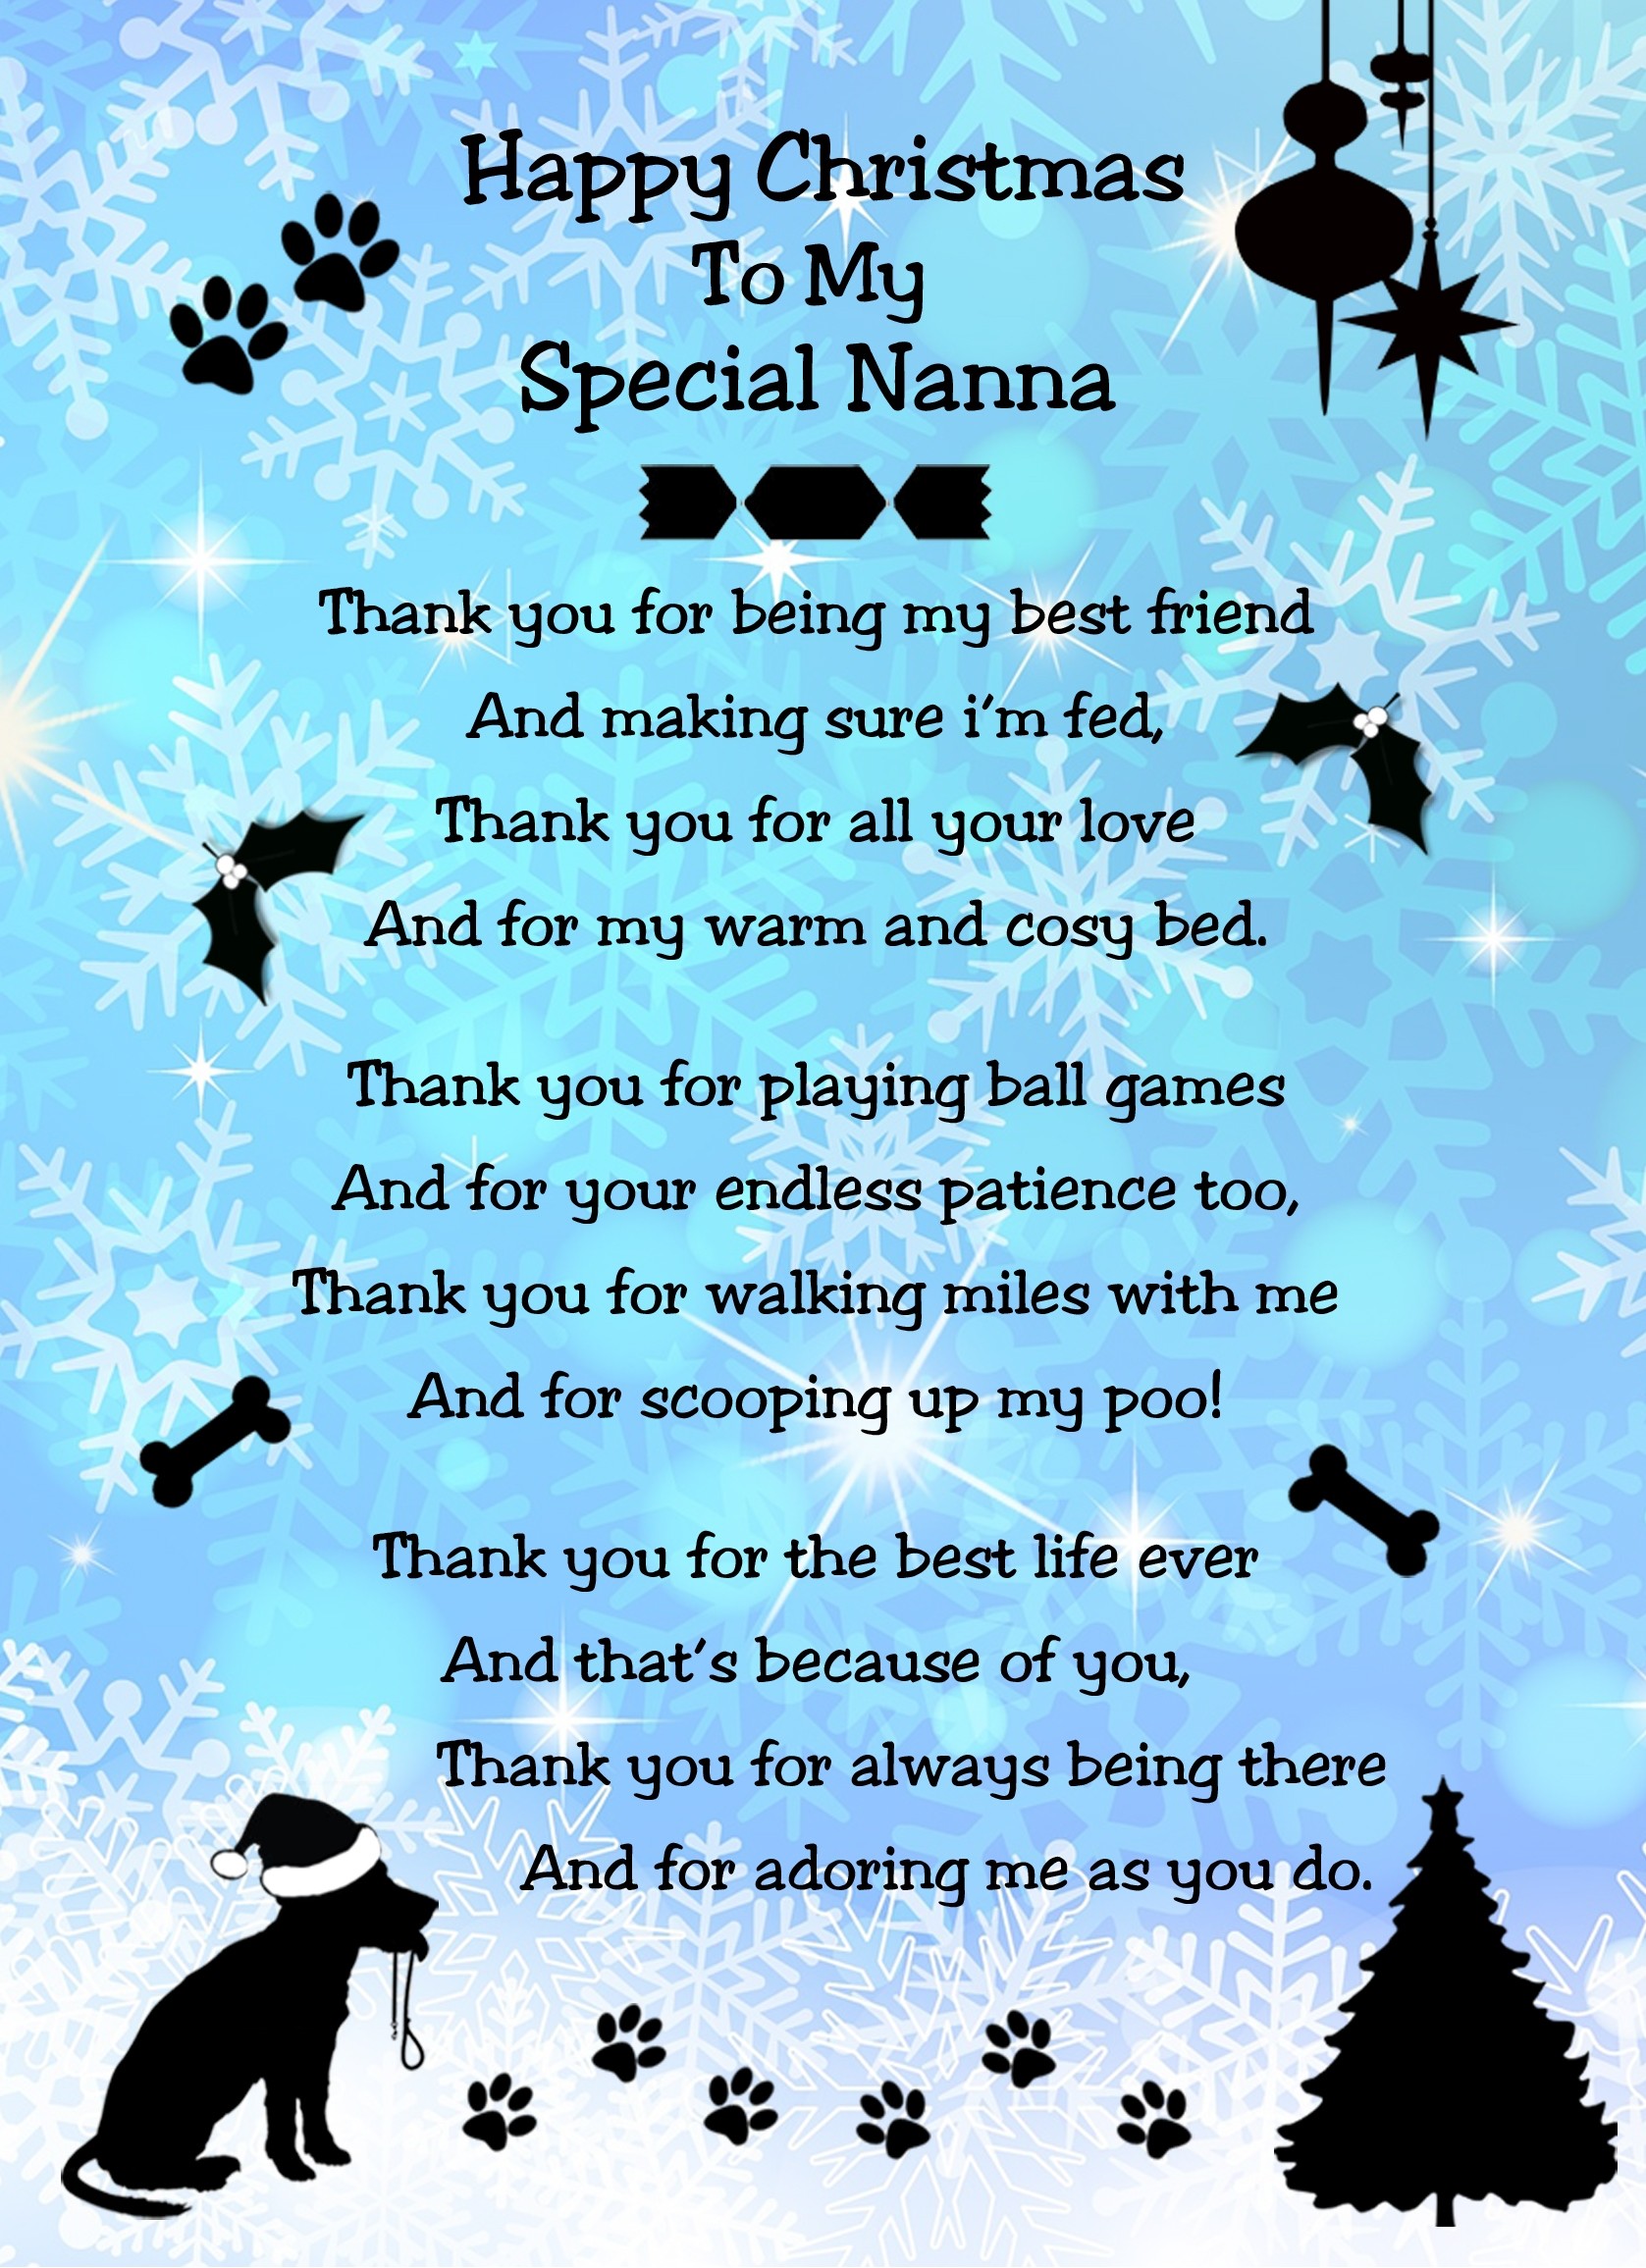 From The Dog Verse Poem Christmas Card (Special Nanna, Snowflake, Happy Christmas)